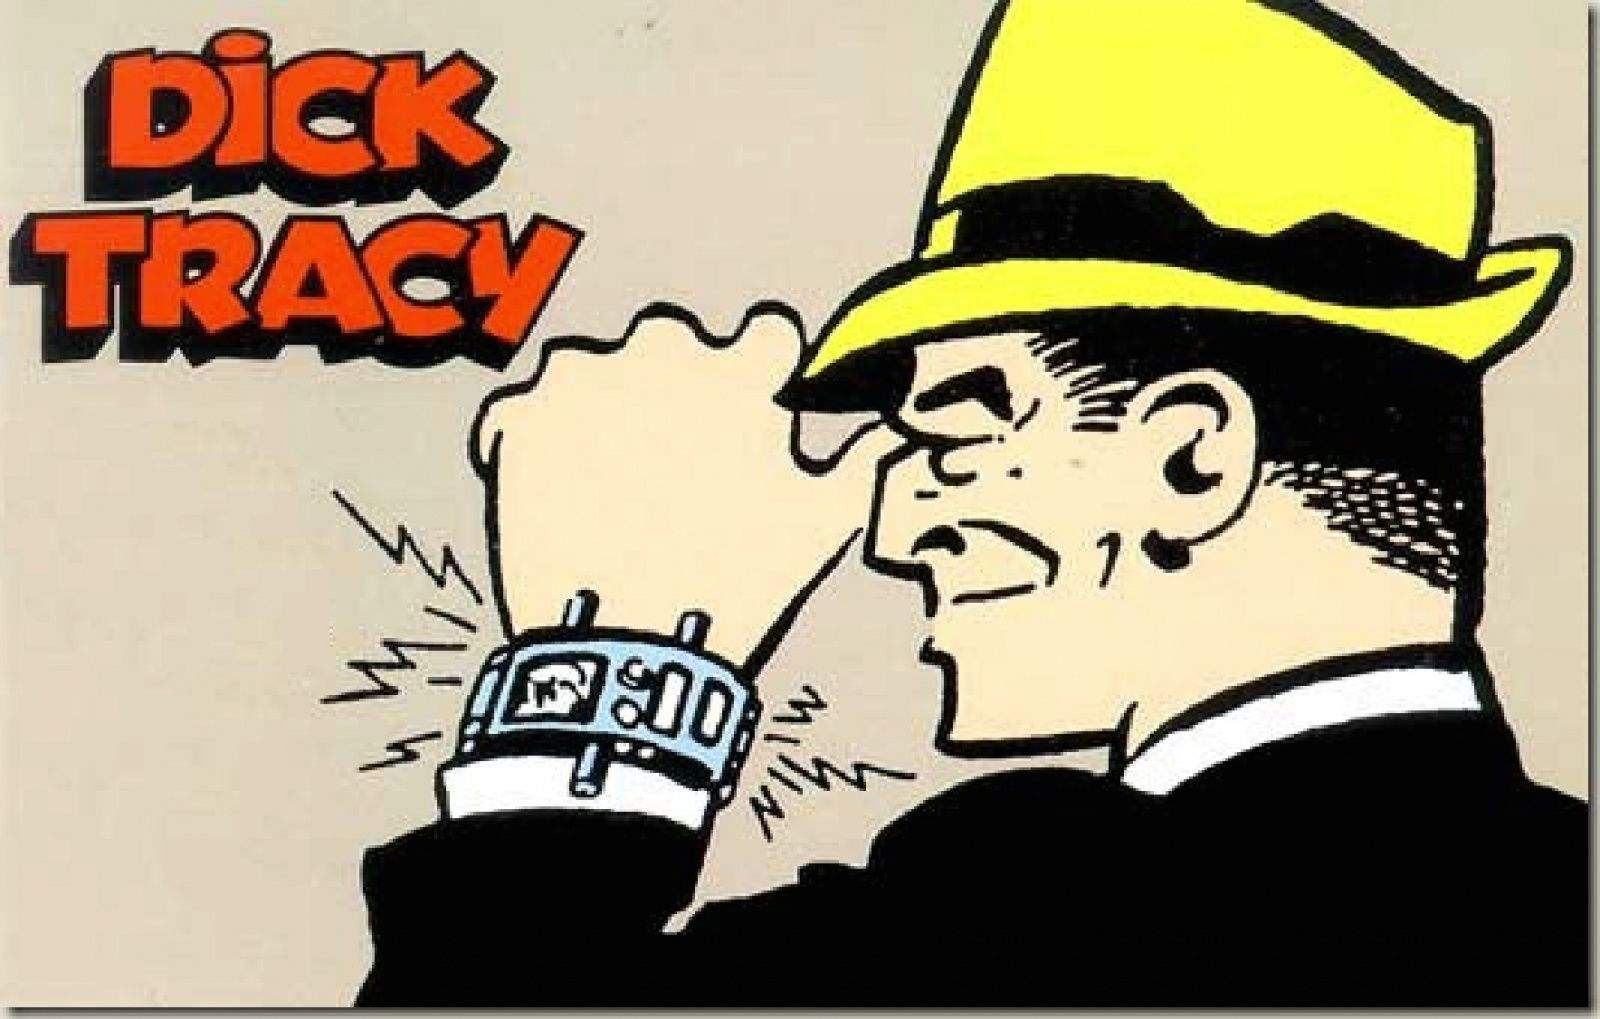 Given that a large proportion of Silicon Valley is made up of sci-fi geeks, it’s no surprise that over the years tech has focused on bringing to life many of the once outlandish concepts seen in movies, TV series and comic books.With the Apple Watch bringing several more of these to life -- Dick Tracy’s 2-Way Wrist Radio among them -- we thought the time was right to run down our 8 favorite sci-fi gadgets we’d love to see turn into actual products, as outlandish as some of them might be.After all, you never know when Bill Gates is going to be scanning a blog, looking for ways to unload his fortune.Scan right to check out the rest of the gallery.(Picture: Dick Tracy)